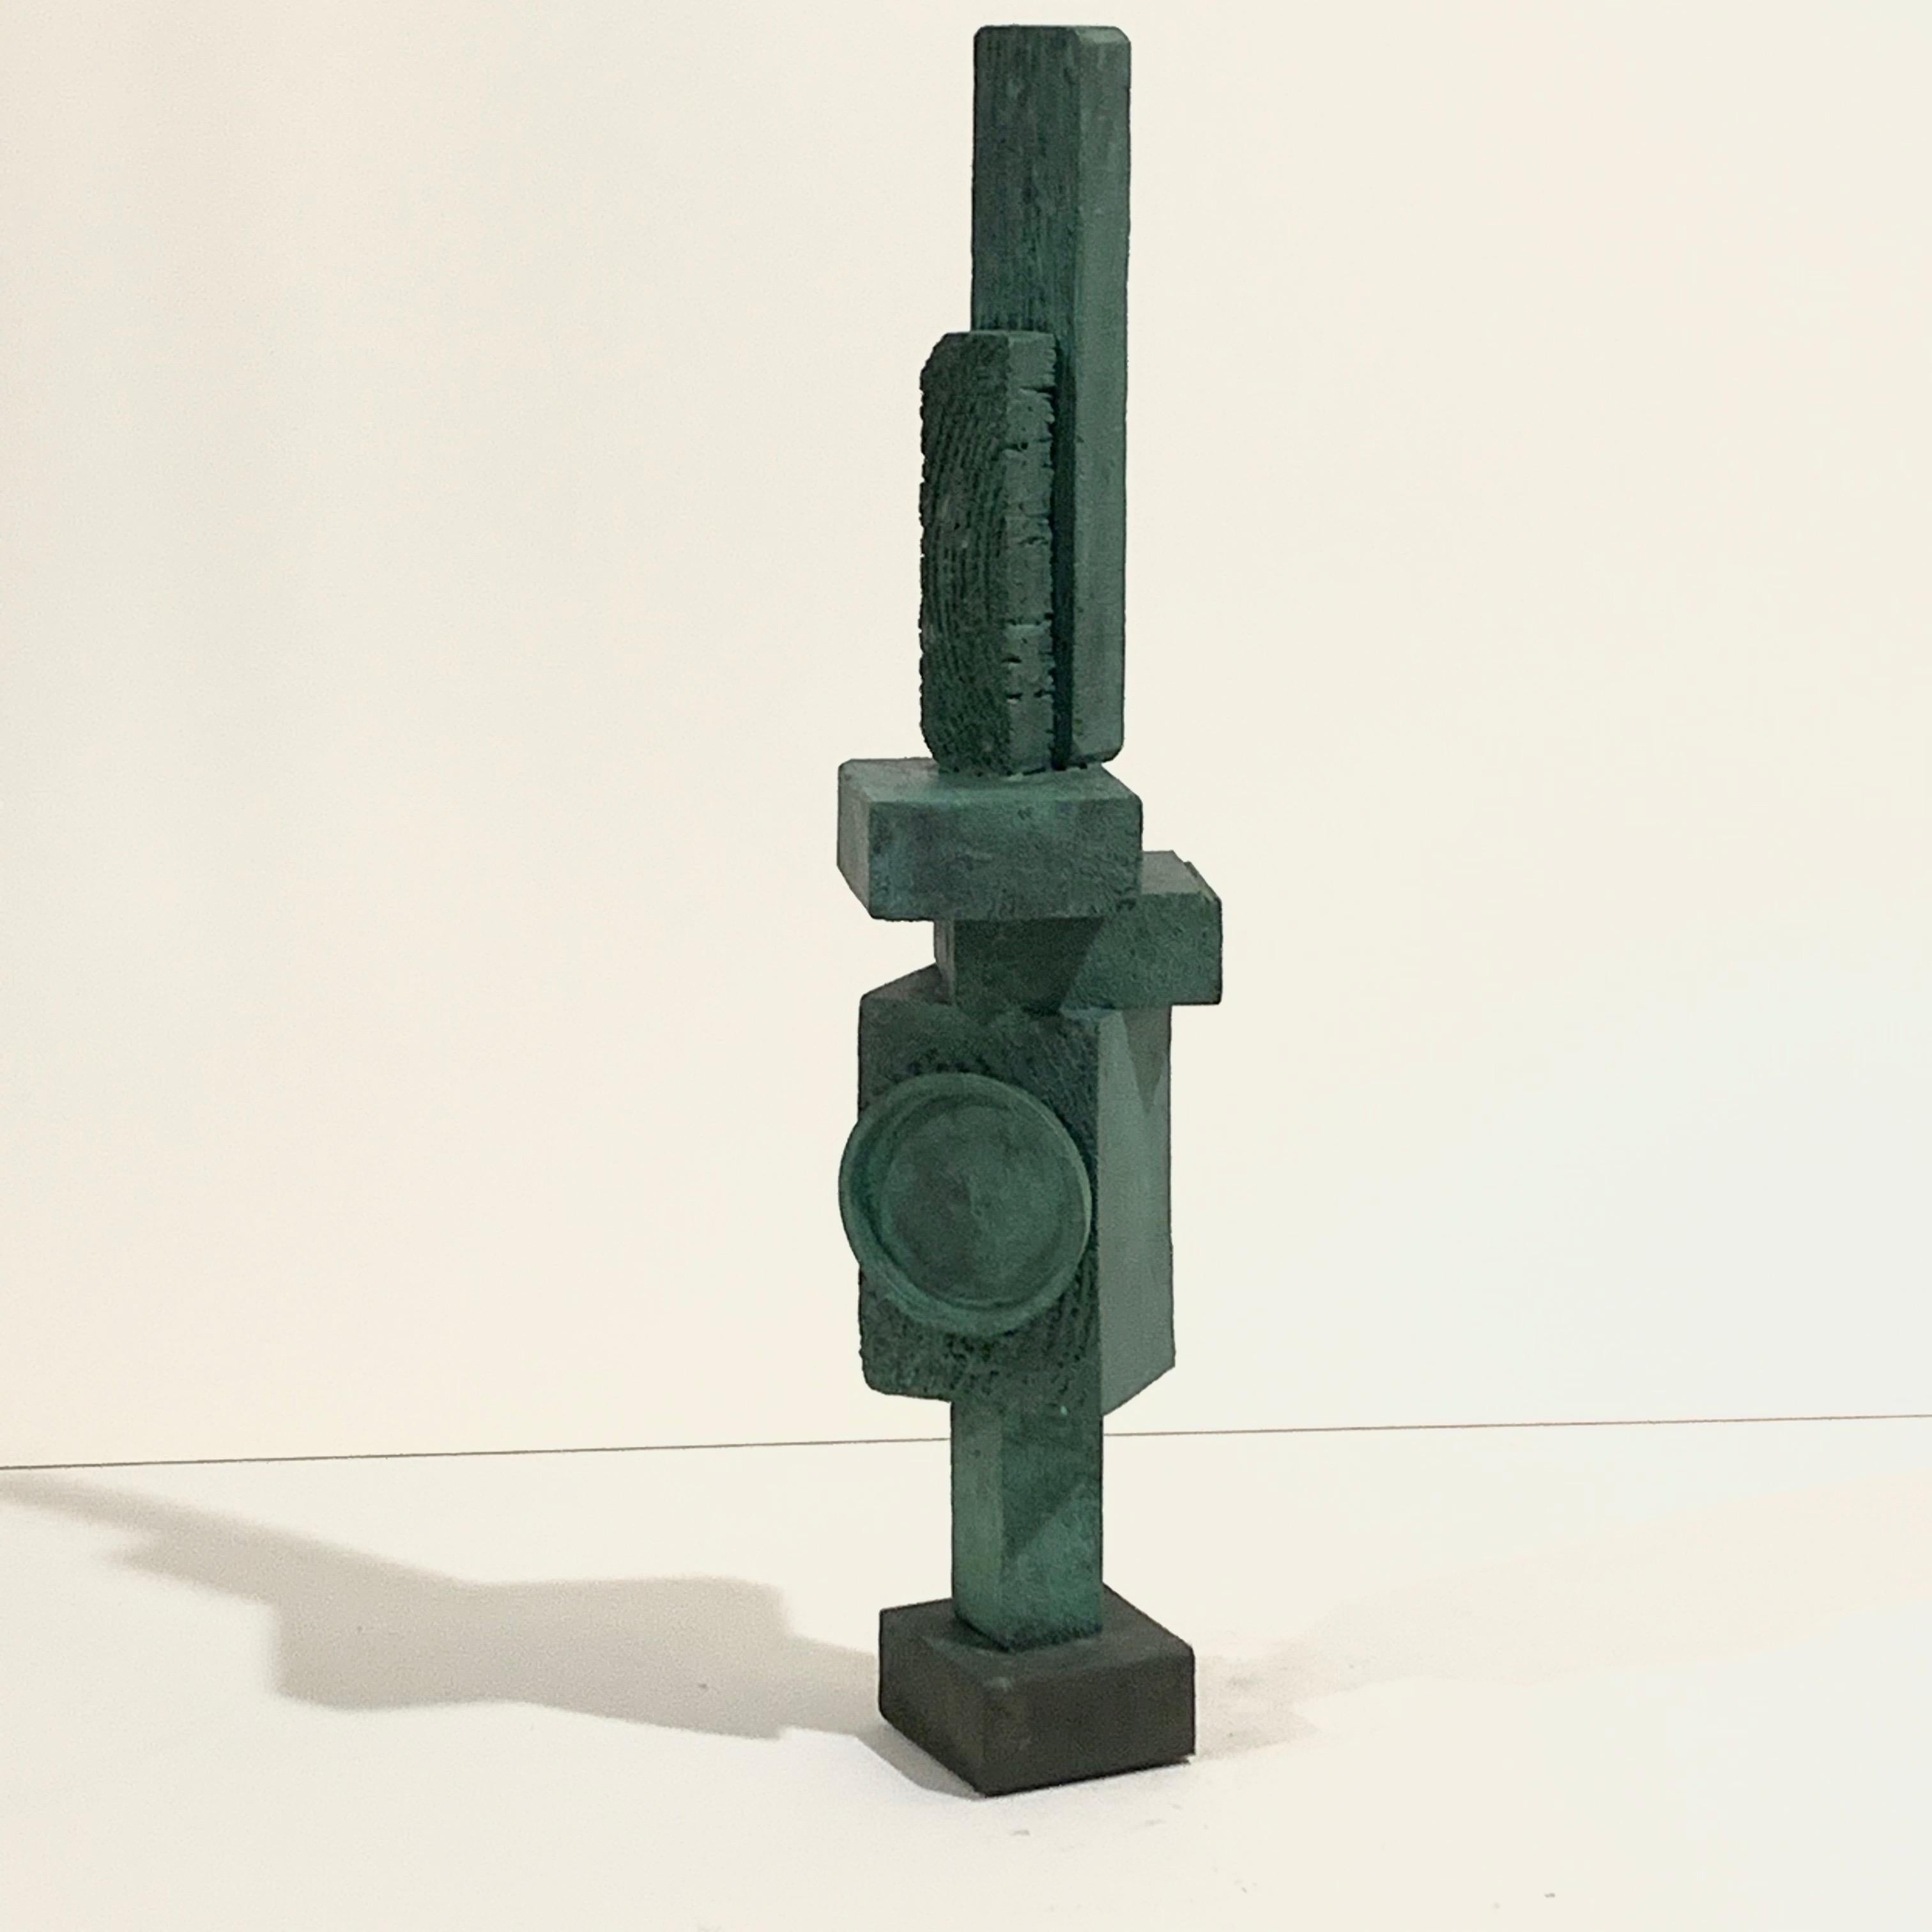 American 'Ignacio' Tall TOTEM Sculpture with Weathered Bronze Finish by Judy Engel